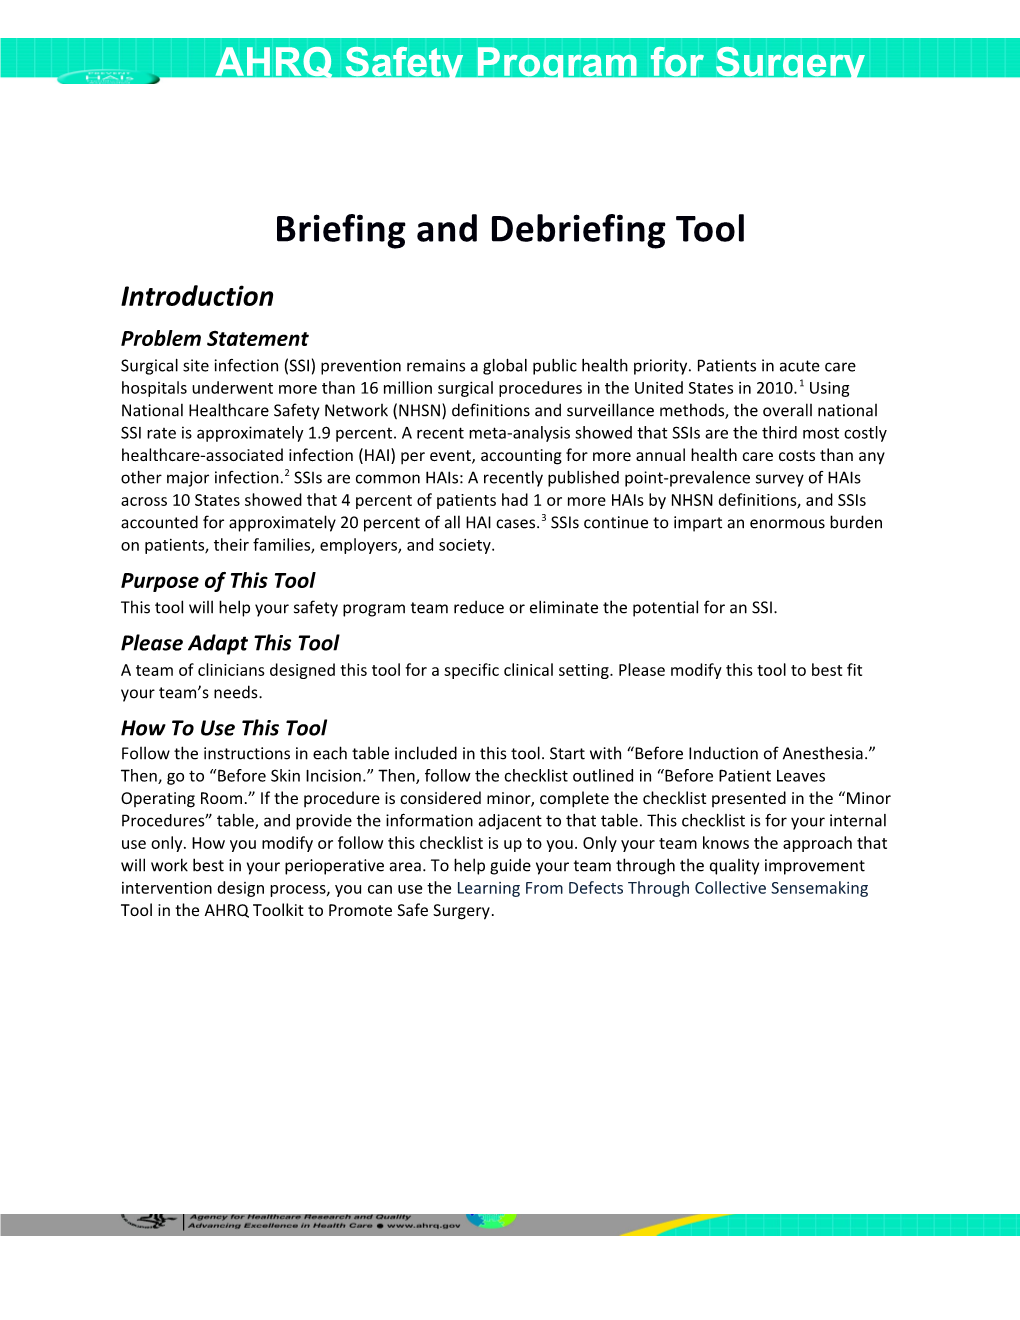 Tool: Briefing and Debriefing Tool